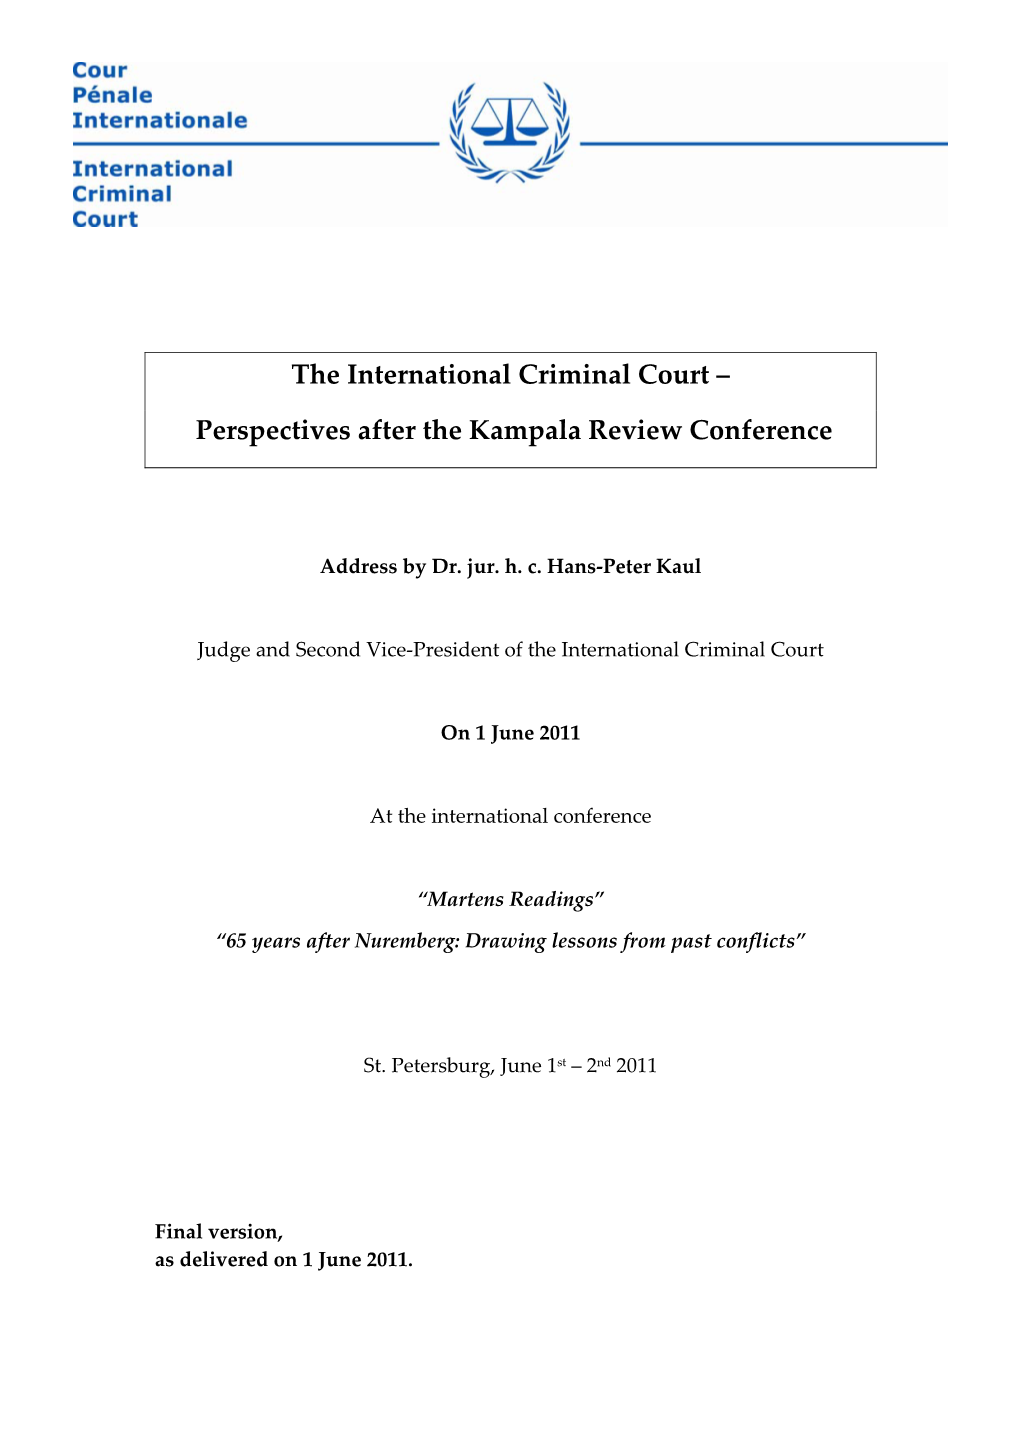 Perspectives After the Kampala Review Conference